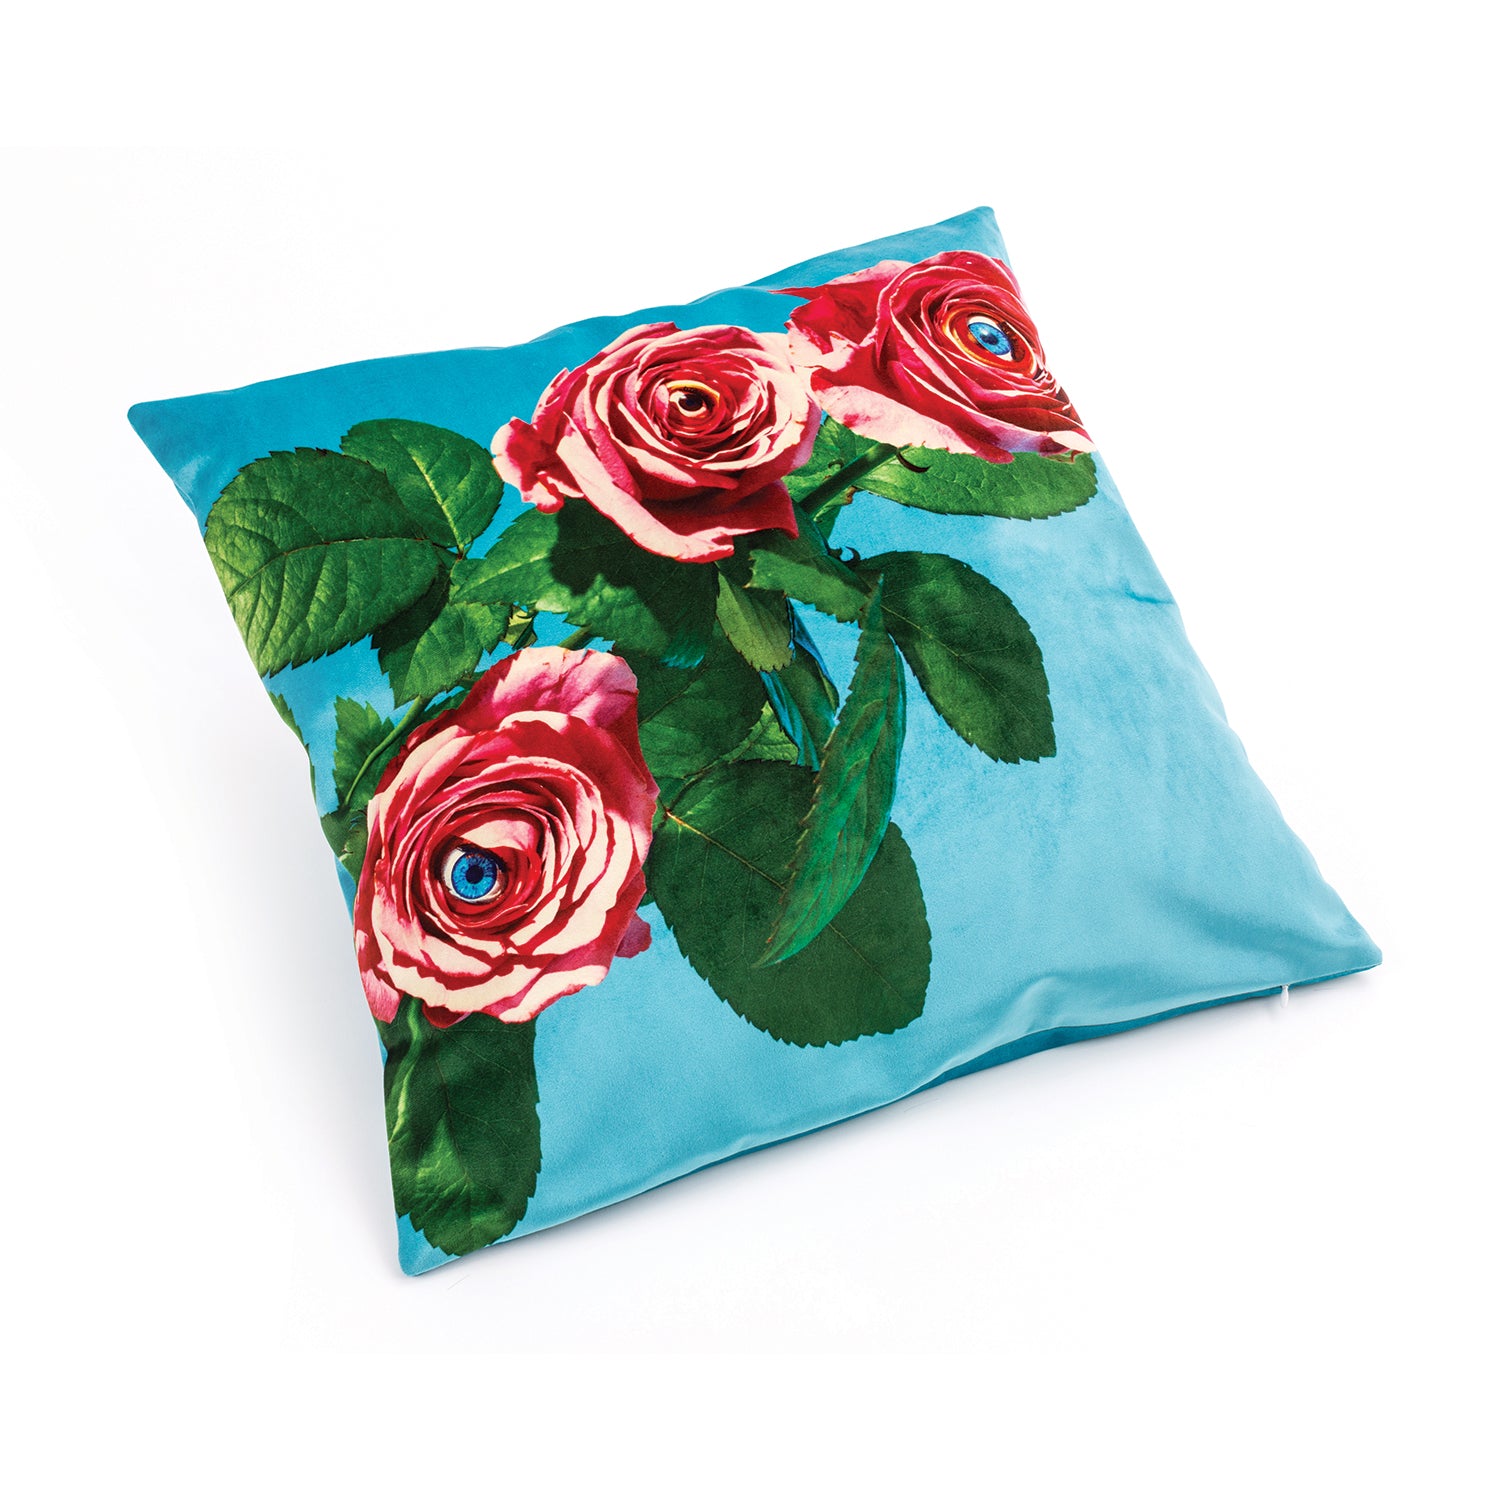 Roses Cushion Cover - Blue